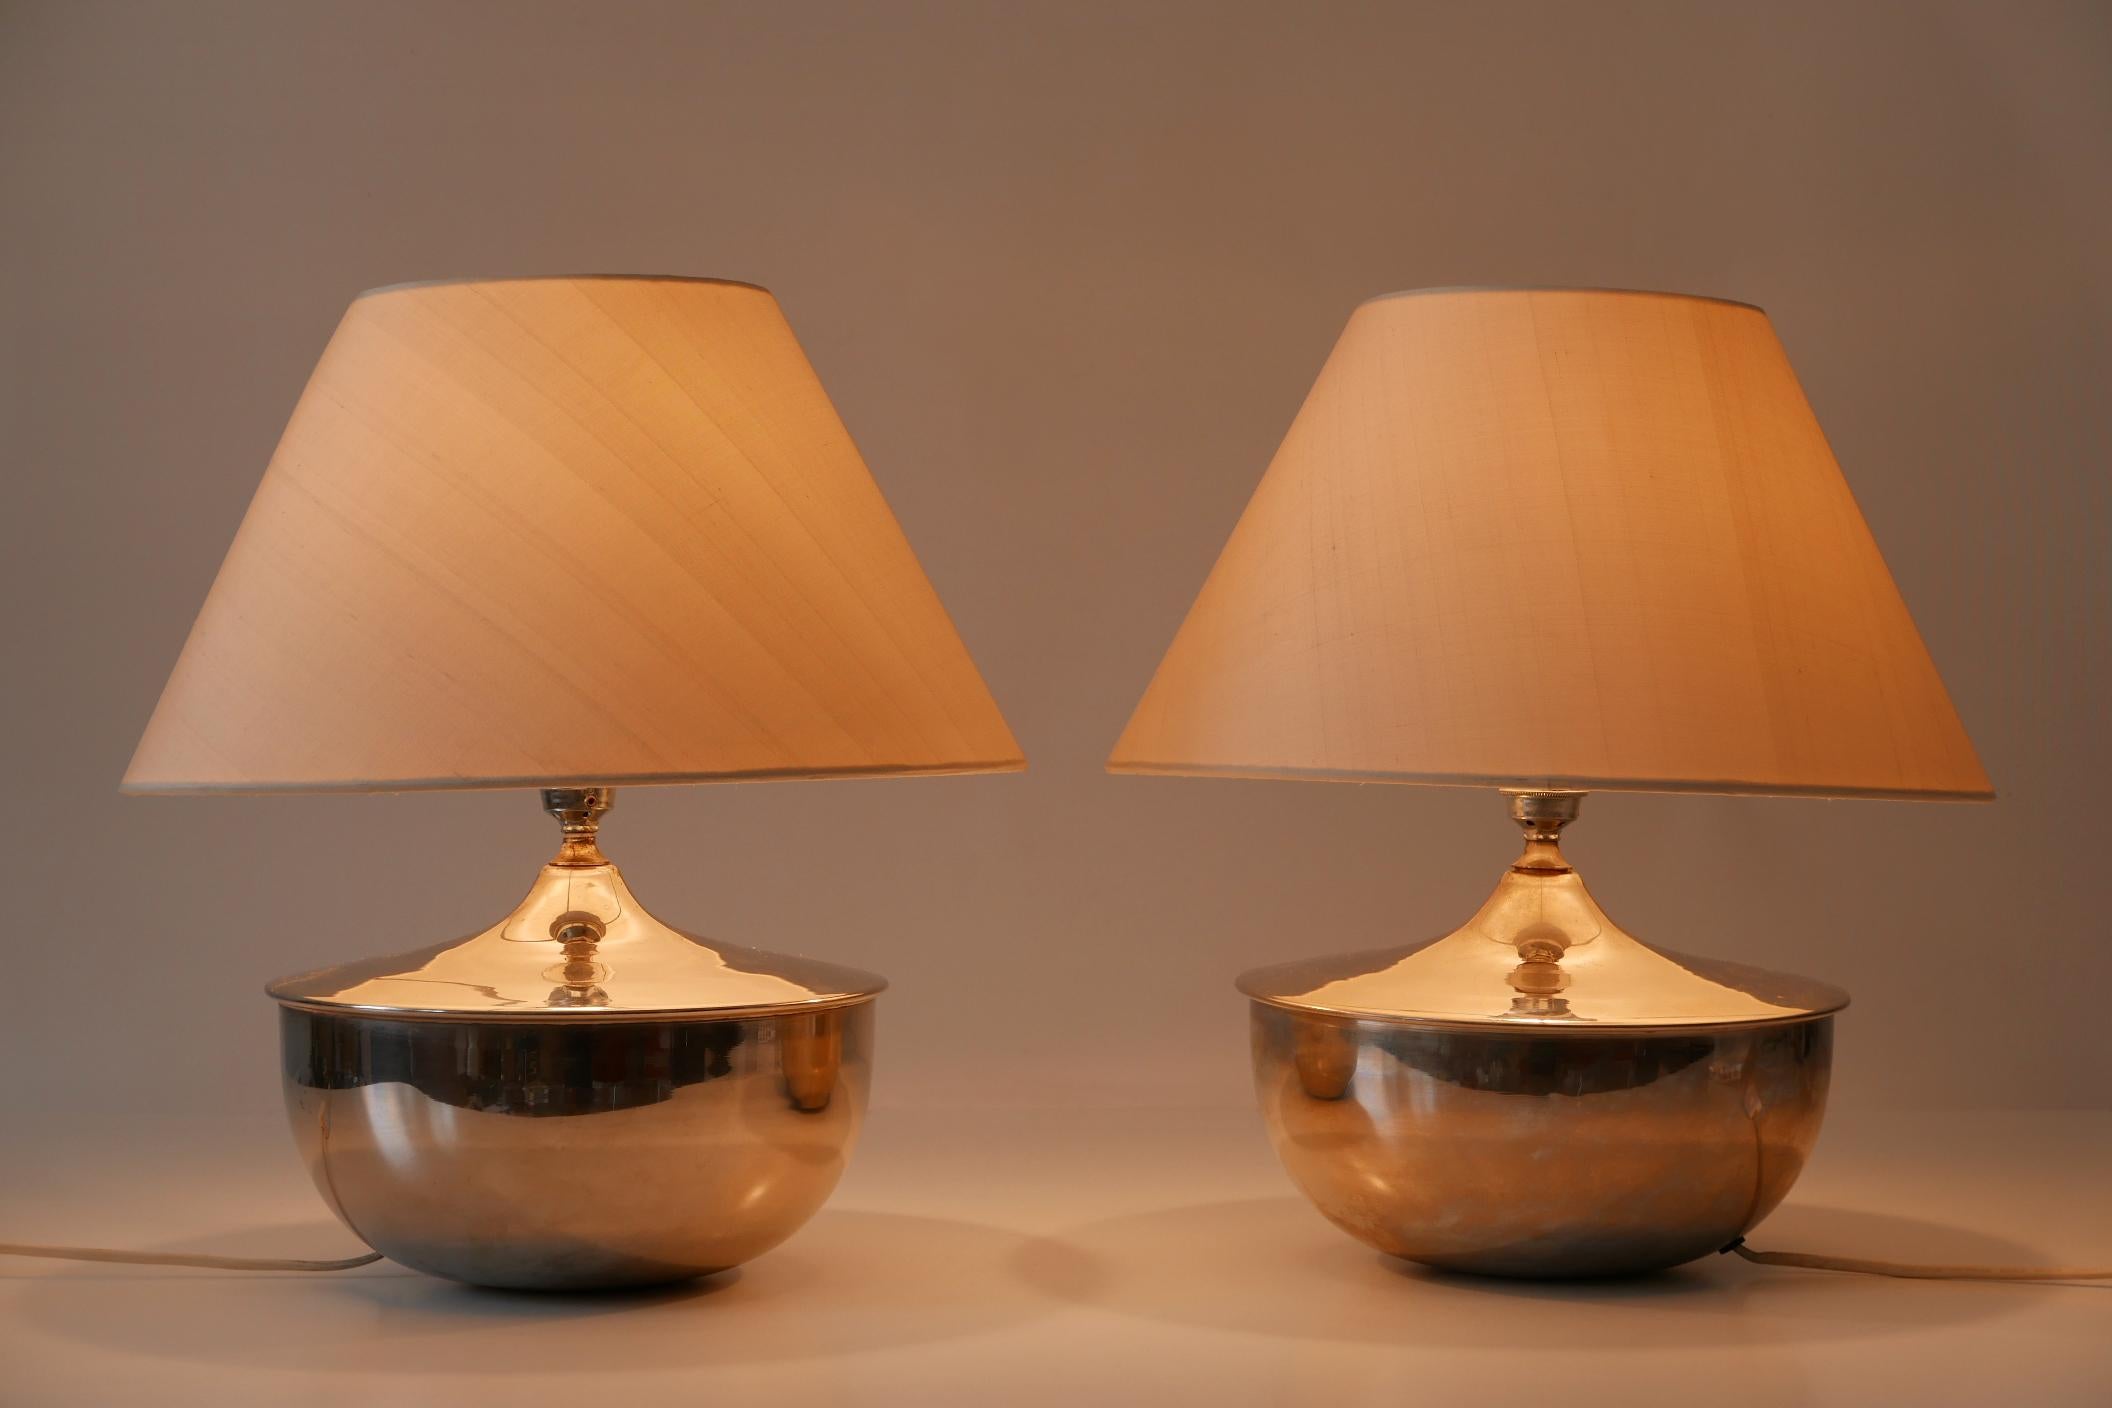 Metal Set of Two Elegant Mid-Century Modern Table Lamps 1970s Germany